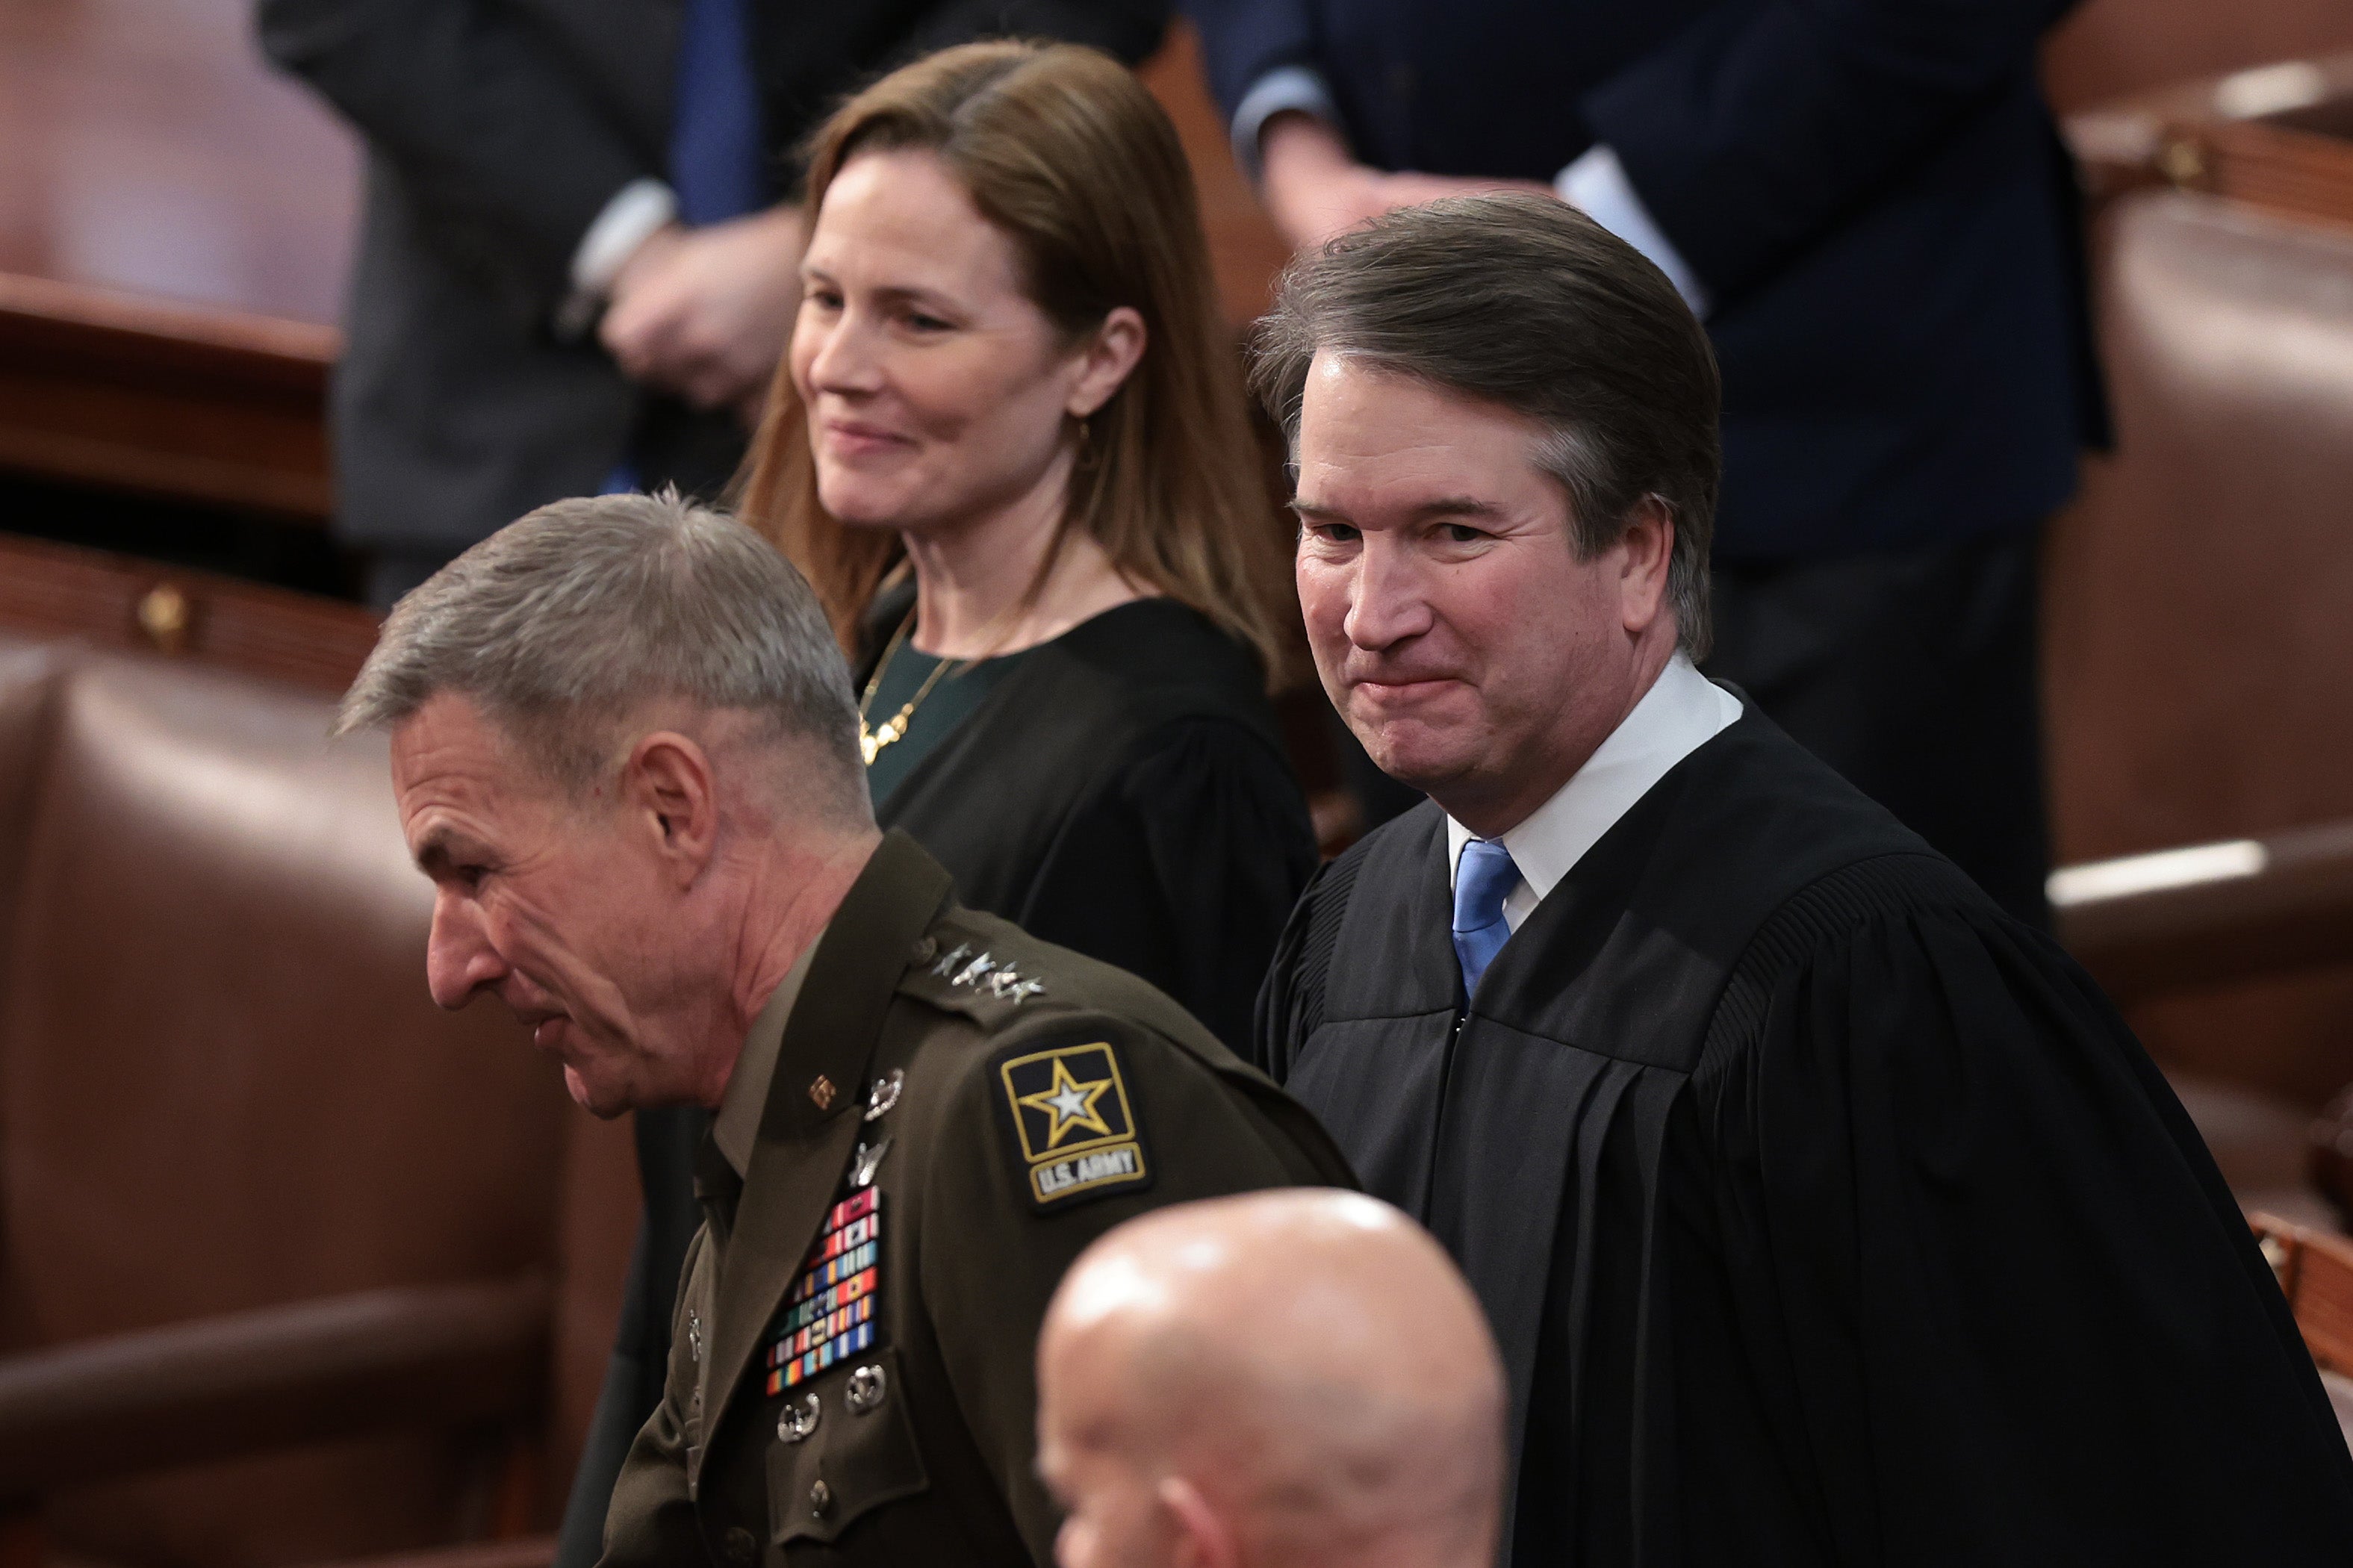 Justices Amy Coney Barrett and Brett Kavanaugh voted to overturn Roe v Wade